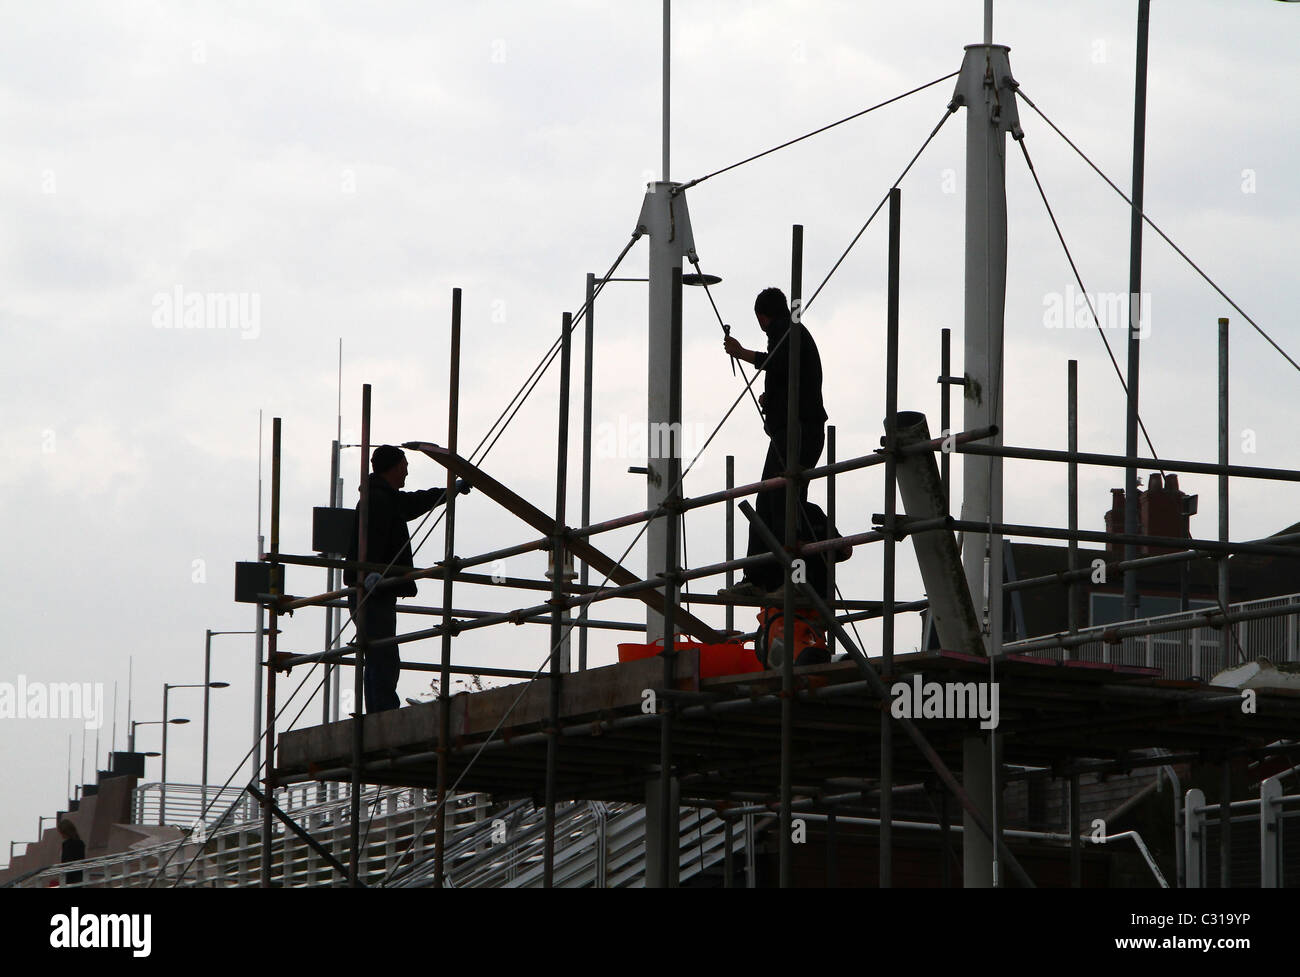 Builders in silhouette working on building. Stock Photo